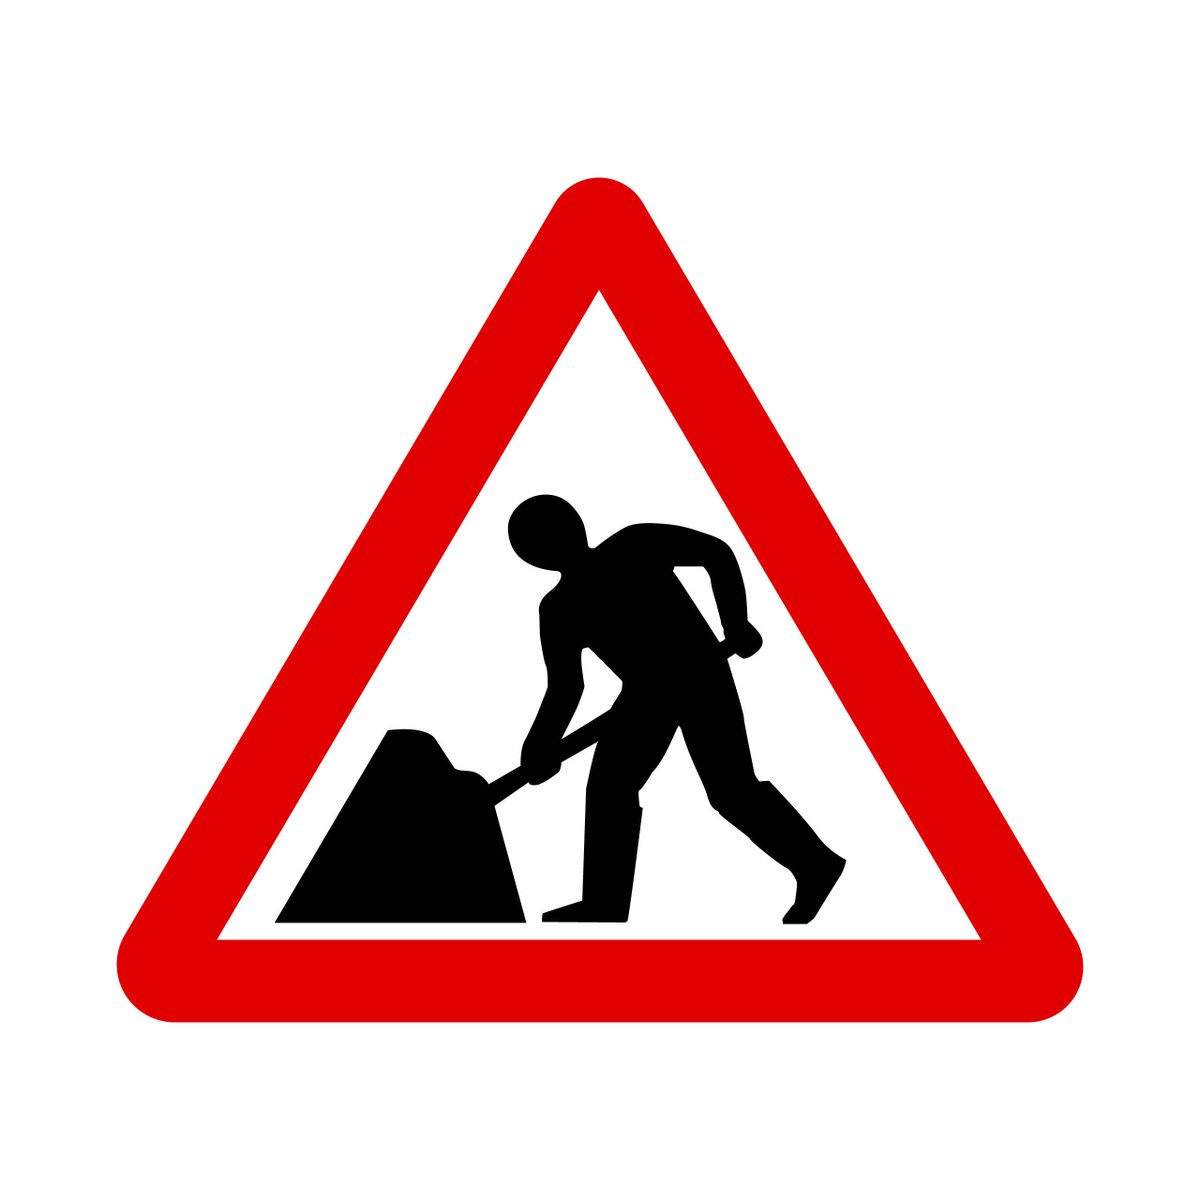 We're due to close Sir Tom Finney Way in Preston between Flintoff Way and Watling Street Road tomorrow morning (27 Apr) from 7am until 12pm at the latest, to carry out urgent repairs to the road surface, and maintenance to drains. The surface has been damaged by all the wet